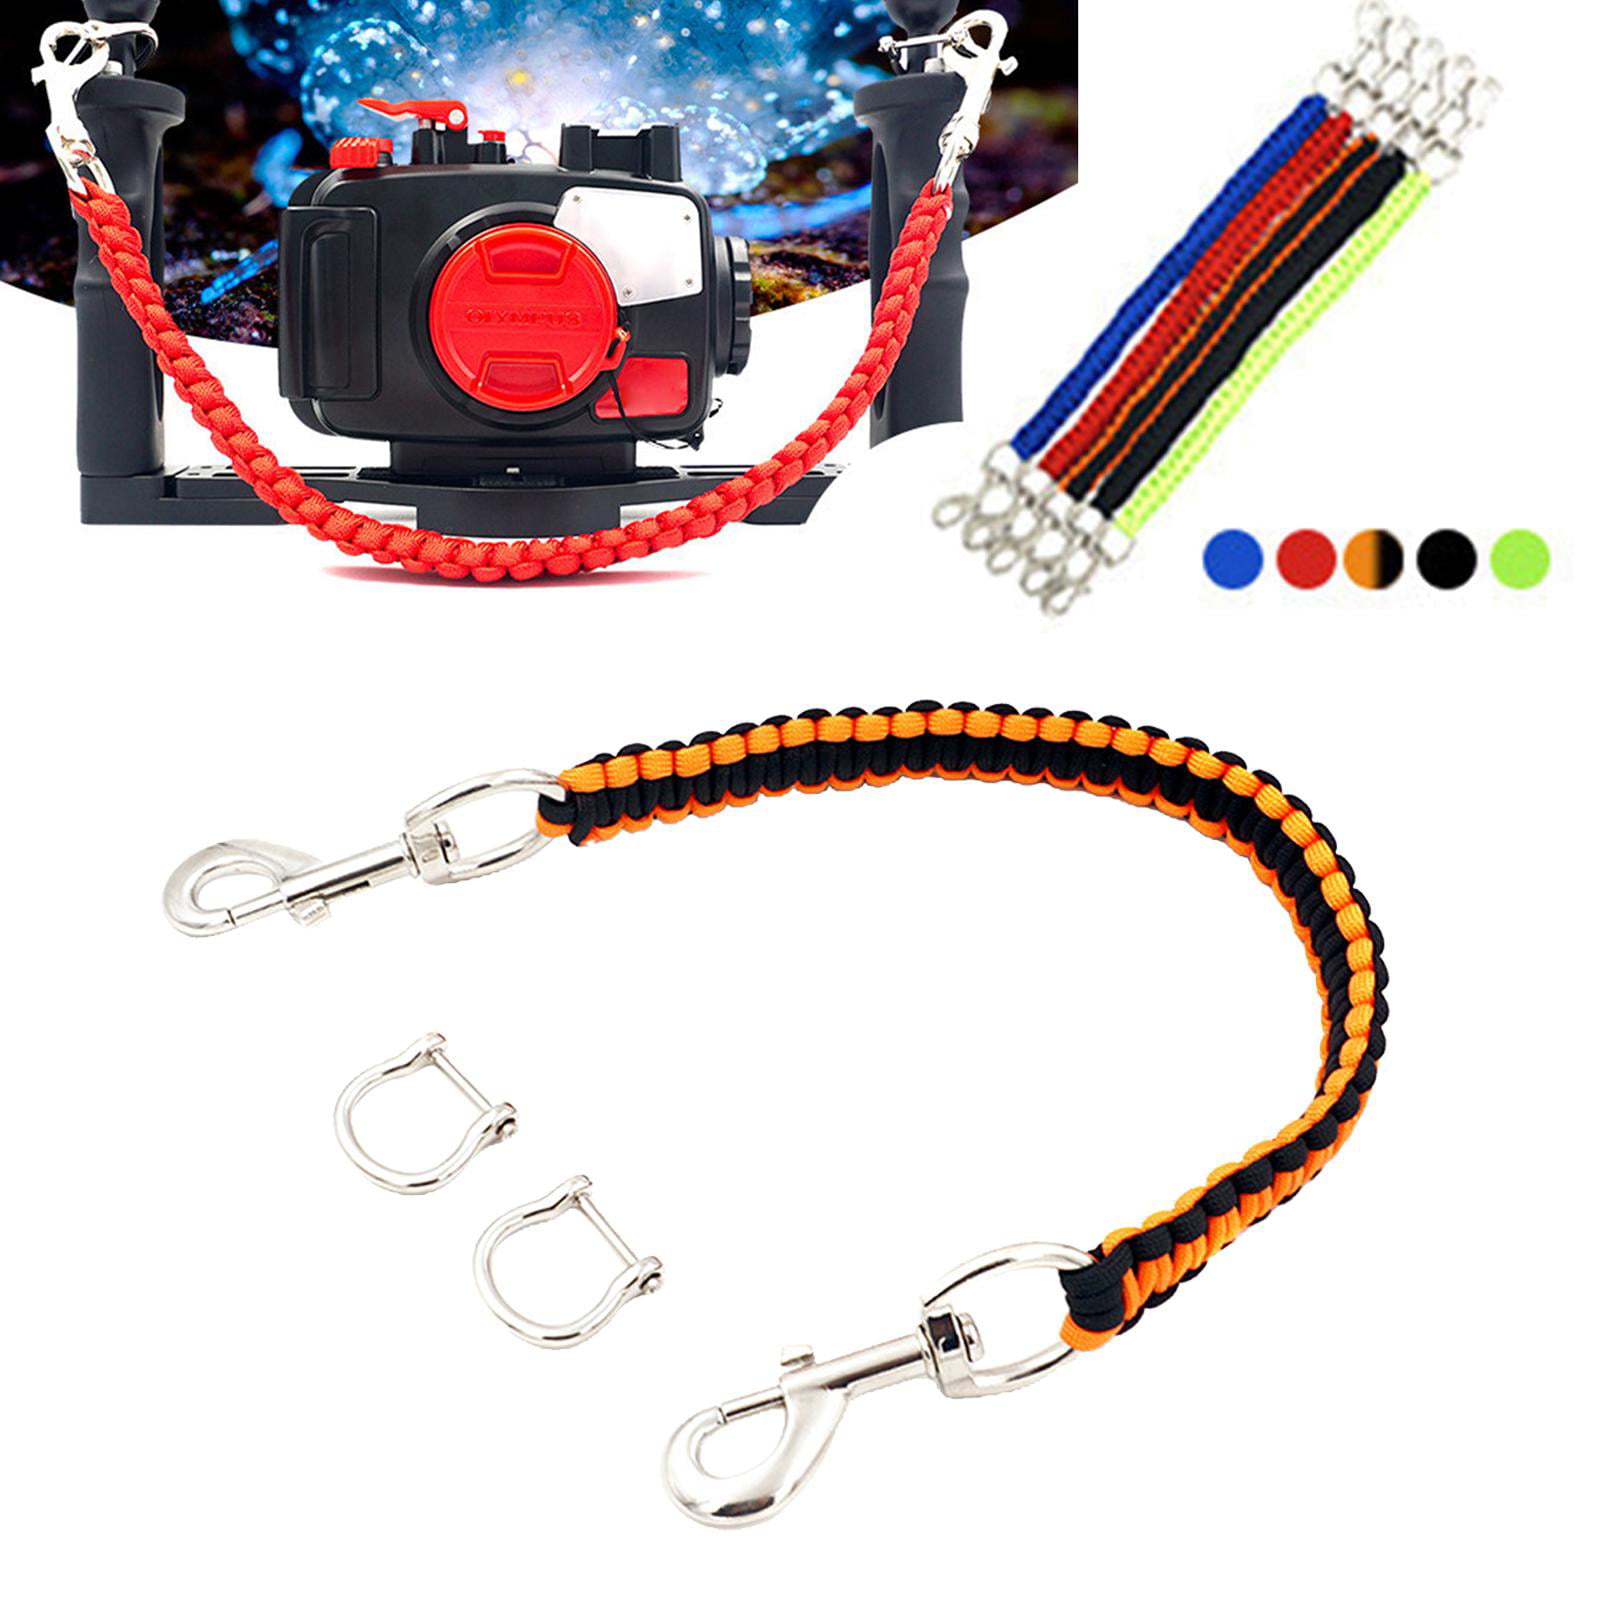 Scuba Diving Camera Waterproof Case Handle Rope Lanyard Strap for Tray 